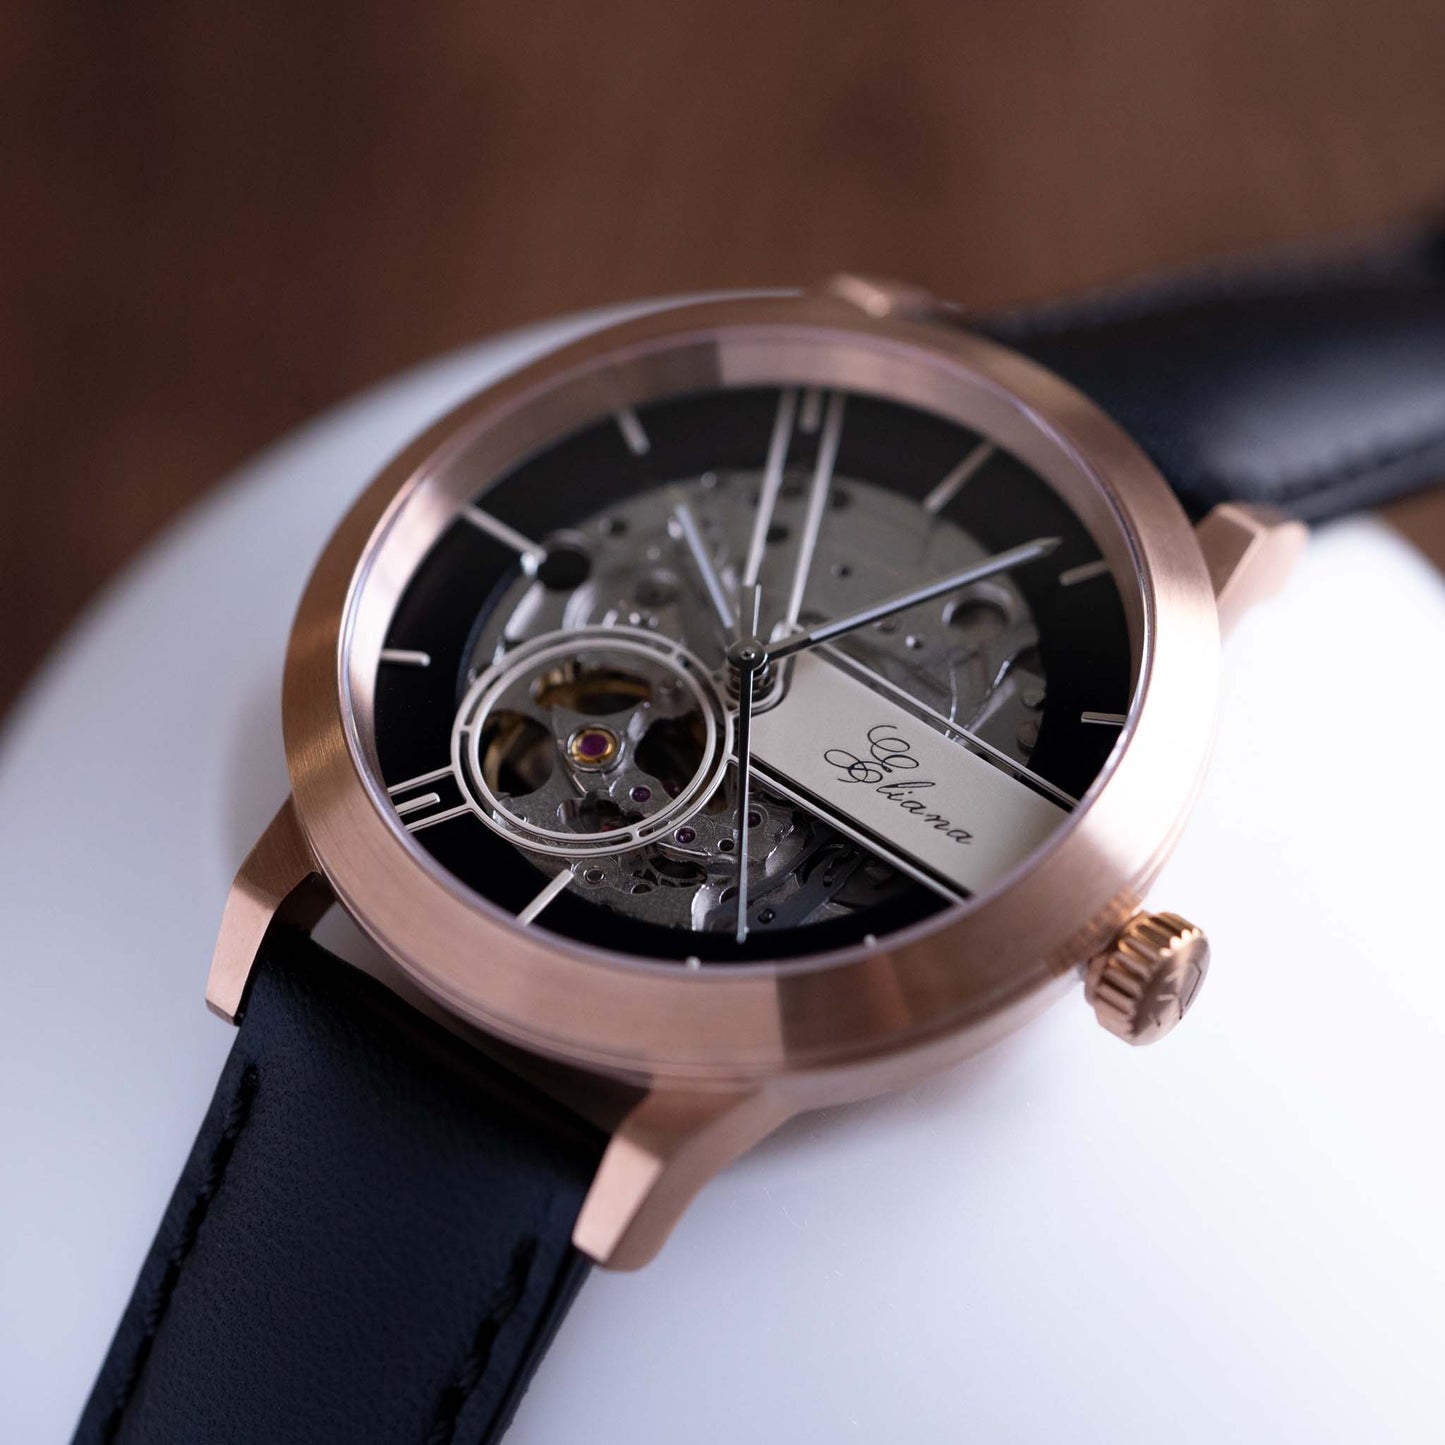 Rose gold women watch with skeleton design and custom watch face